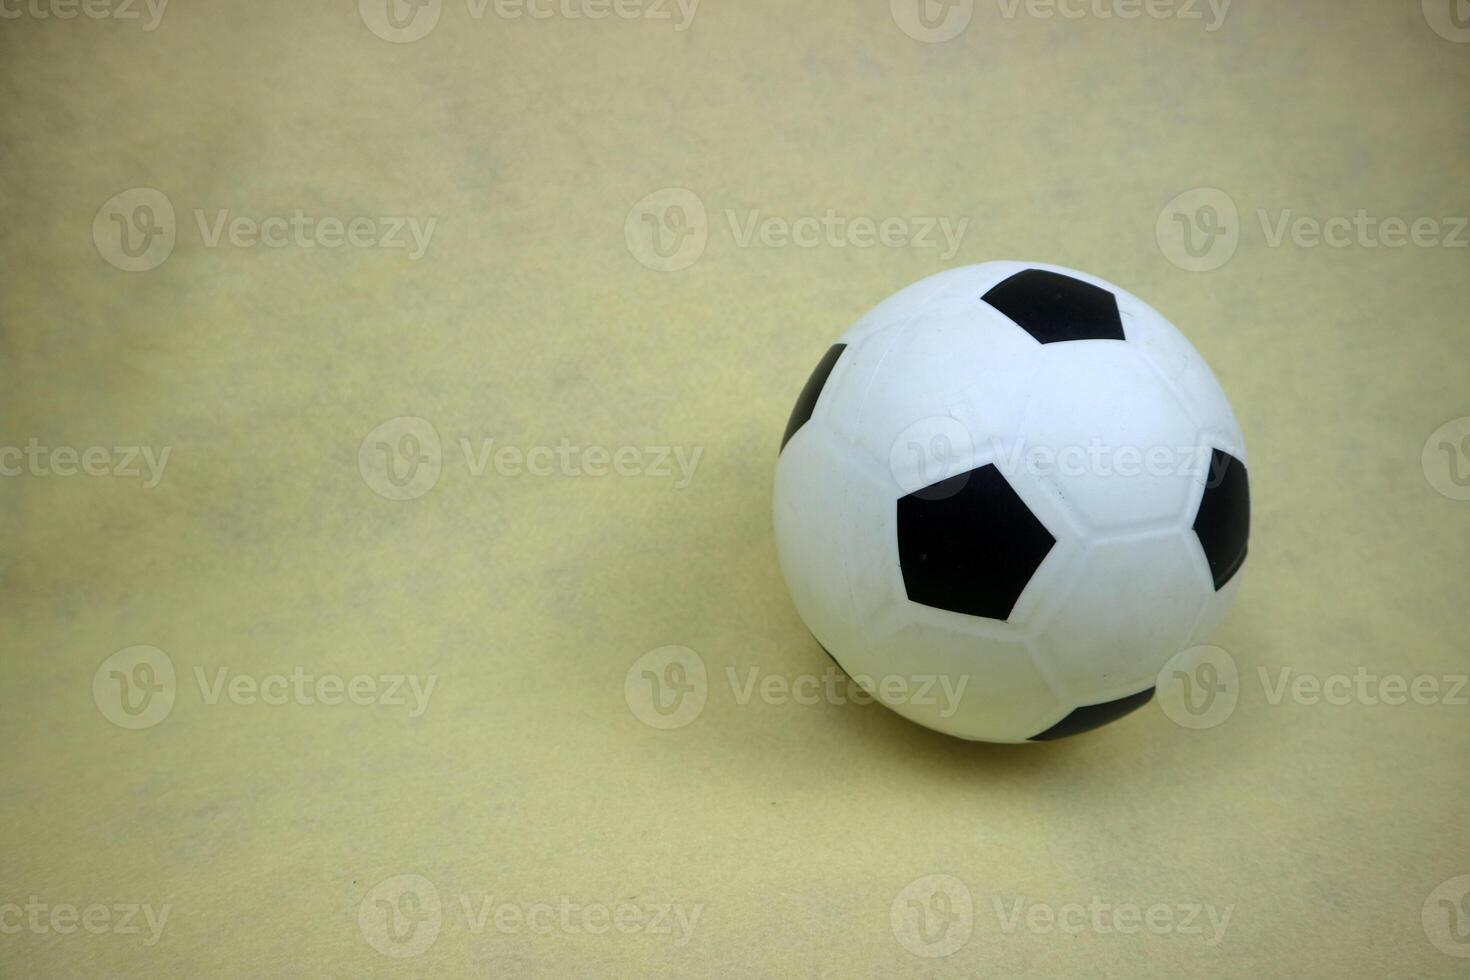 a small white and black toy rubber ball photo